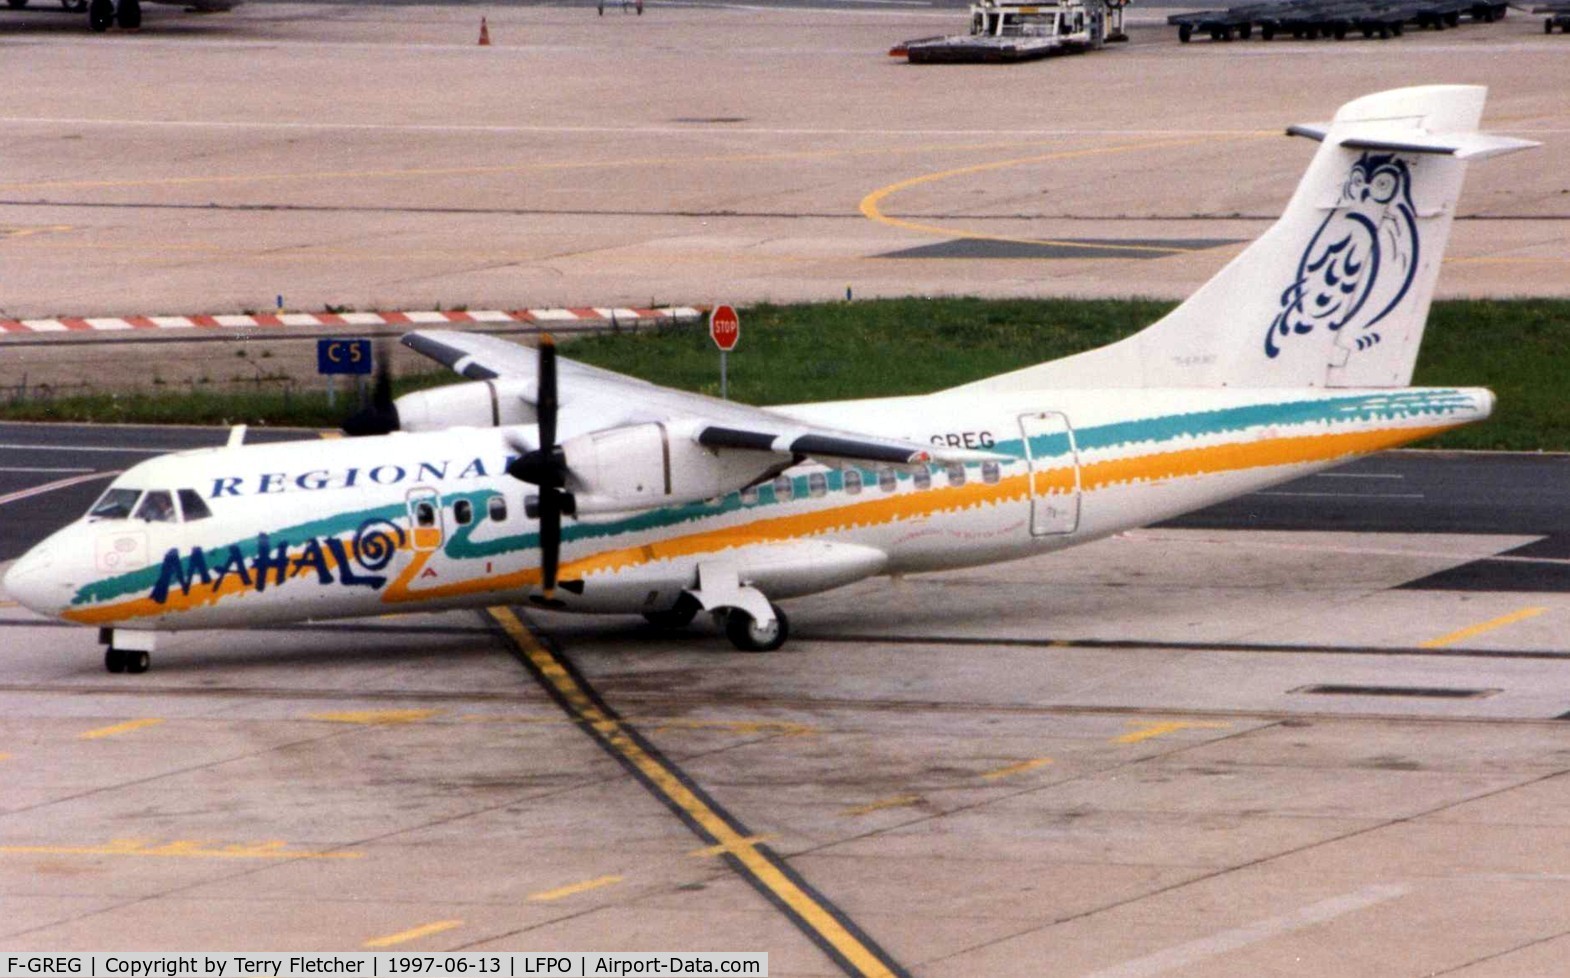 F-GREG, 1993 ATR 42-320 C/N 358, Seen operating at Paris Orly in 1997 - the aircraft still wears the colourful livery of previous operater Mahalo Air